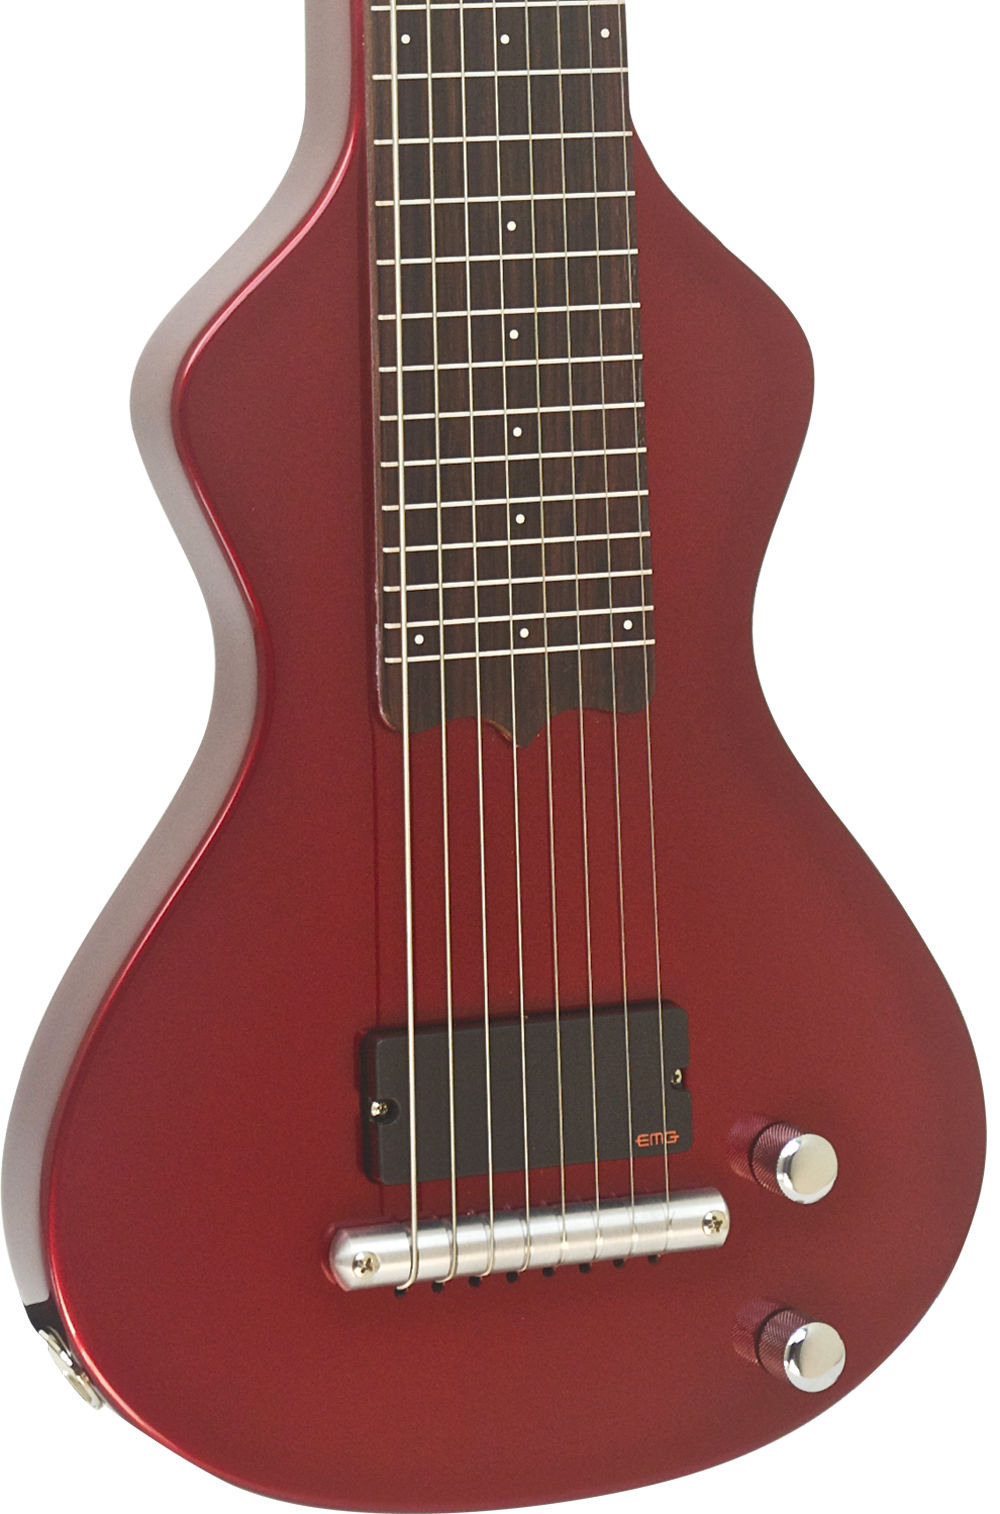 SOLD Asher 8-String Lap Steel, Candy Apple Red Poly, #872